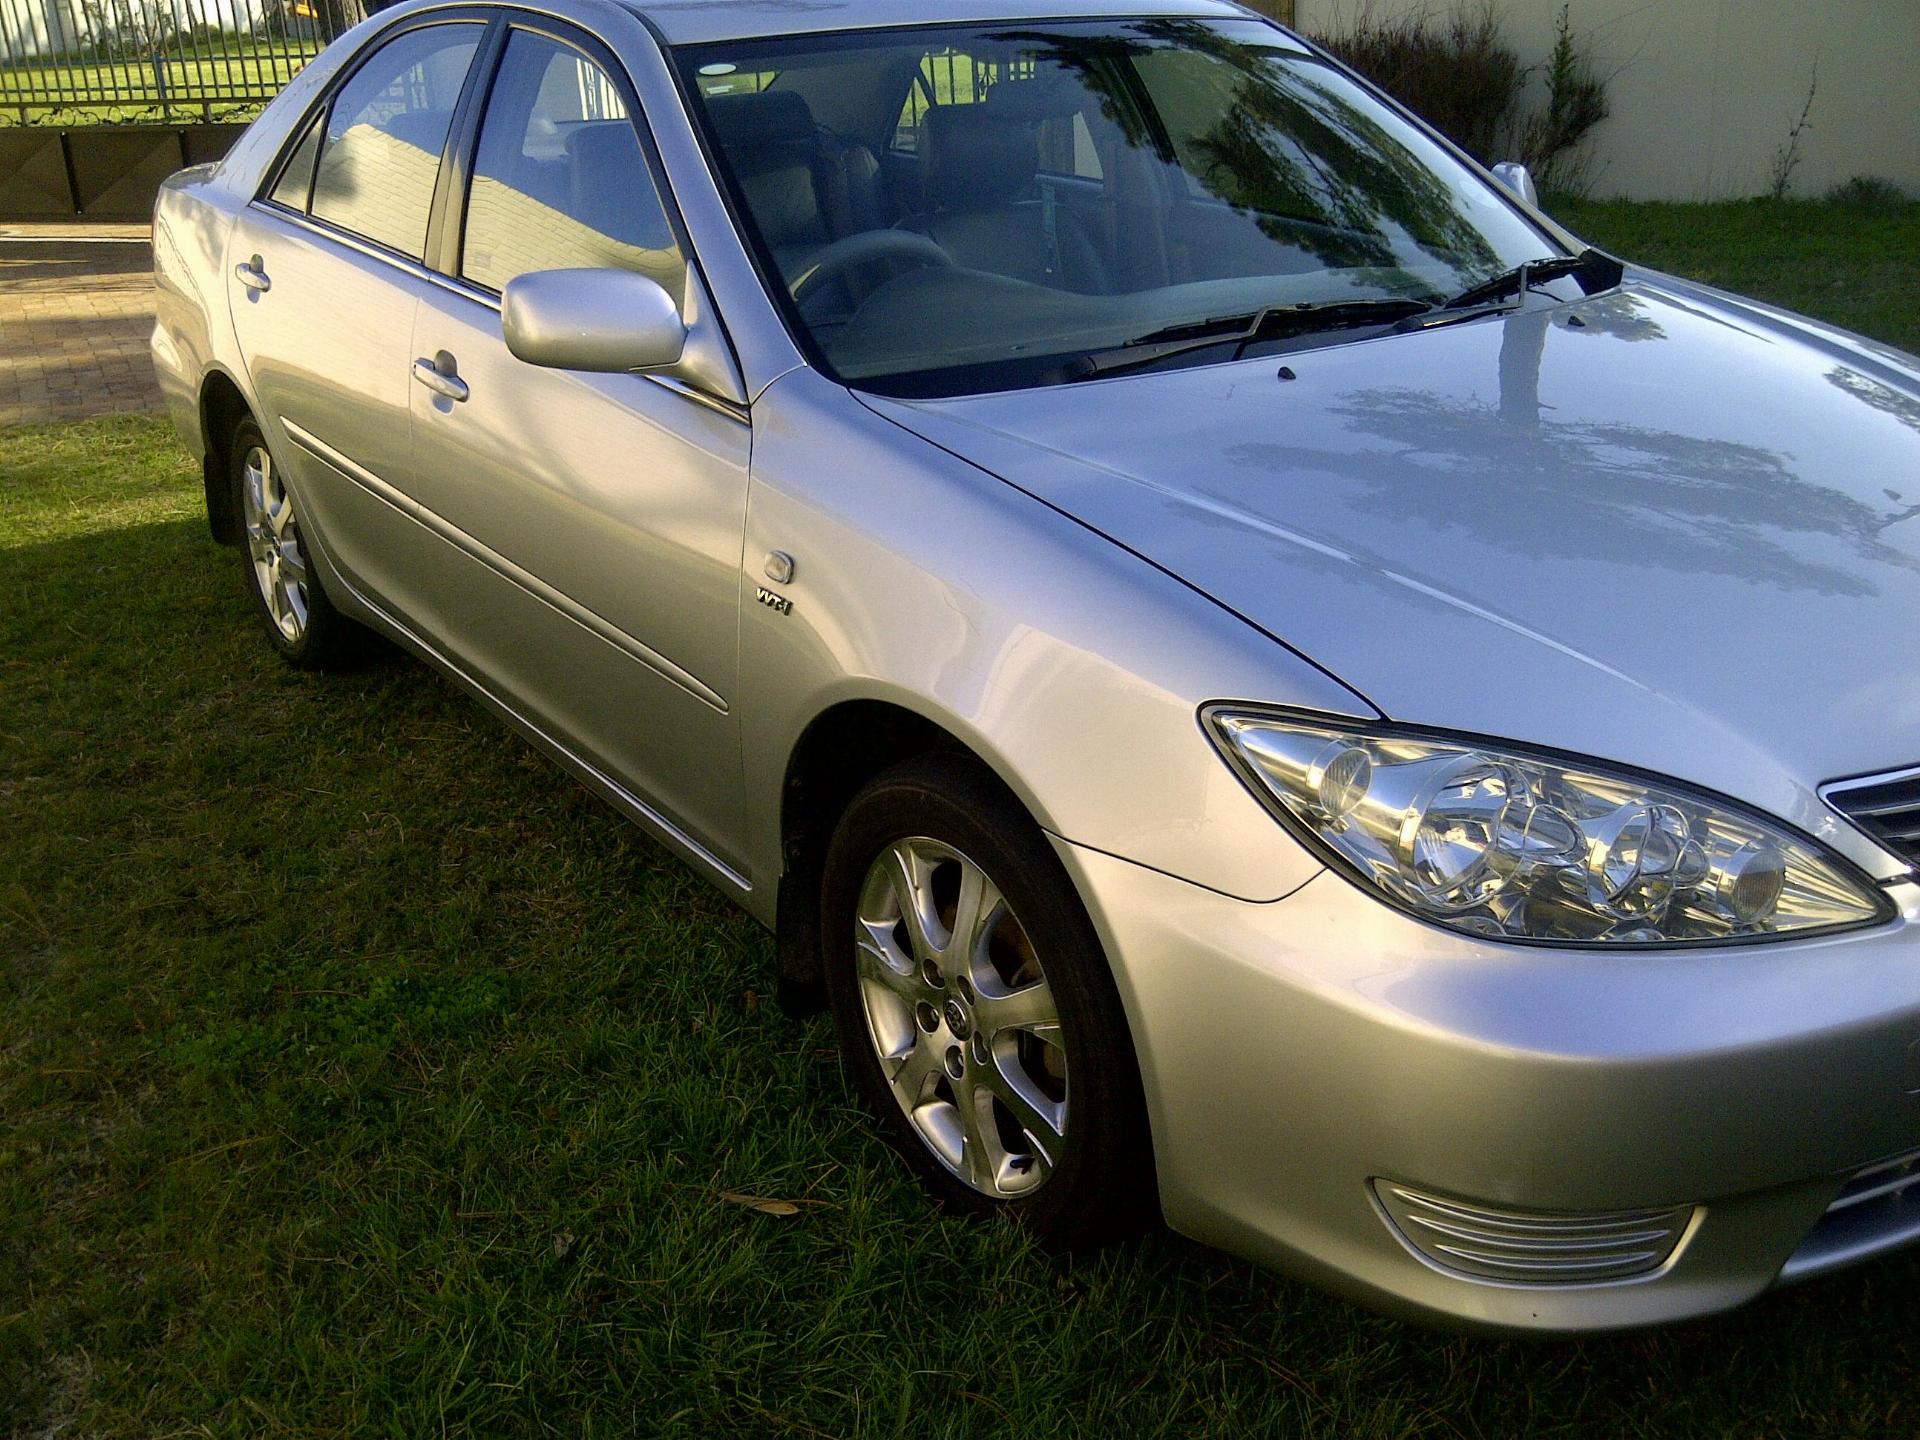 Used Toyota Camry 2.4 Gli Auto 2006 on auction PV1013068